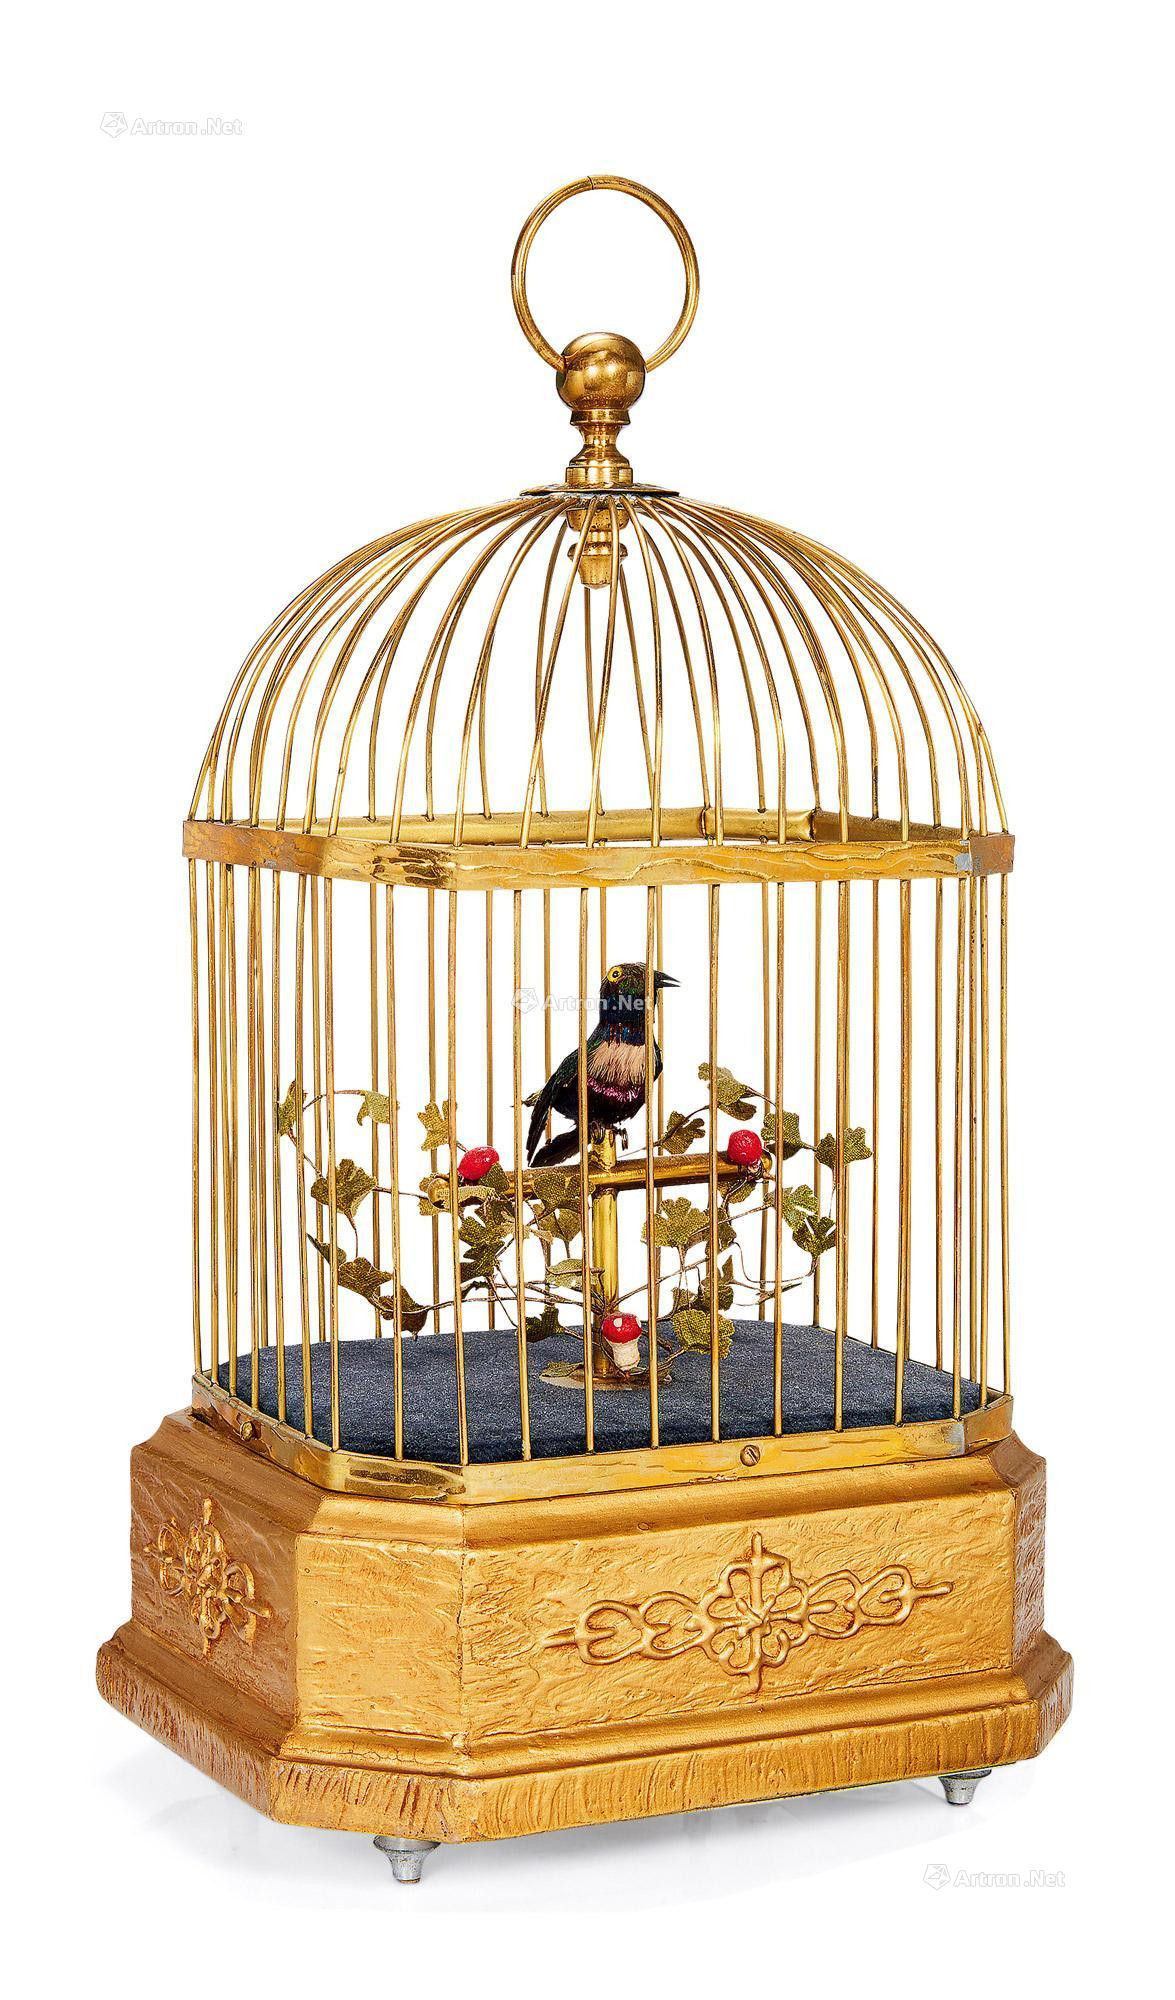 GERMANY A FINE AND RARE GILT BRONZE SINGING BIRD CAGE